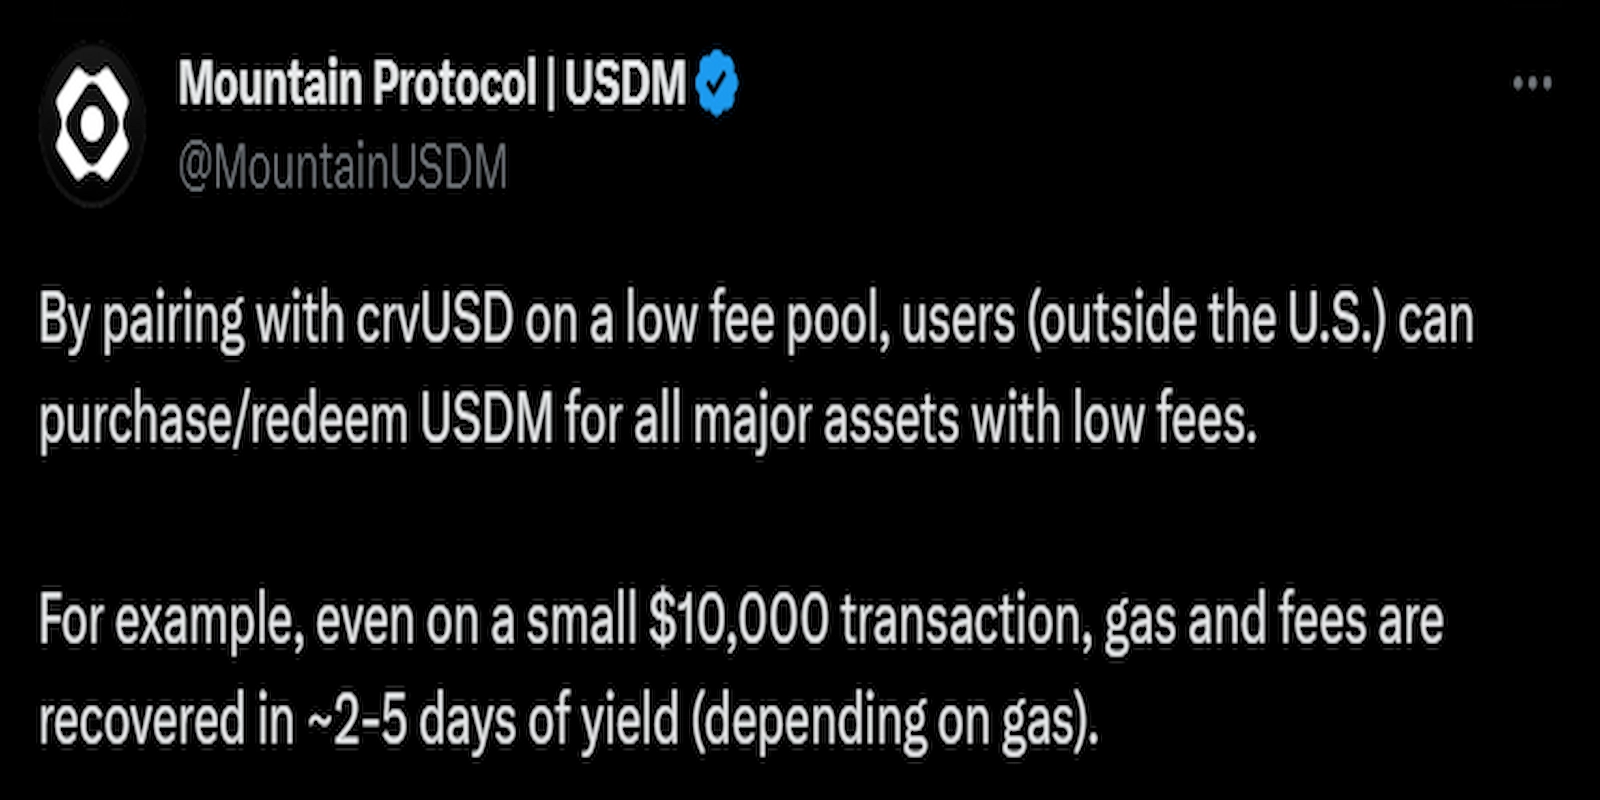 Mountain Protocol stated users could redeem USDM with low fees on Curve Finance.